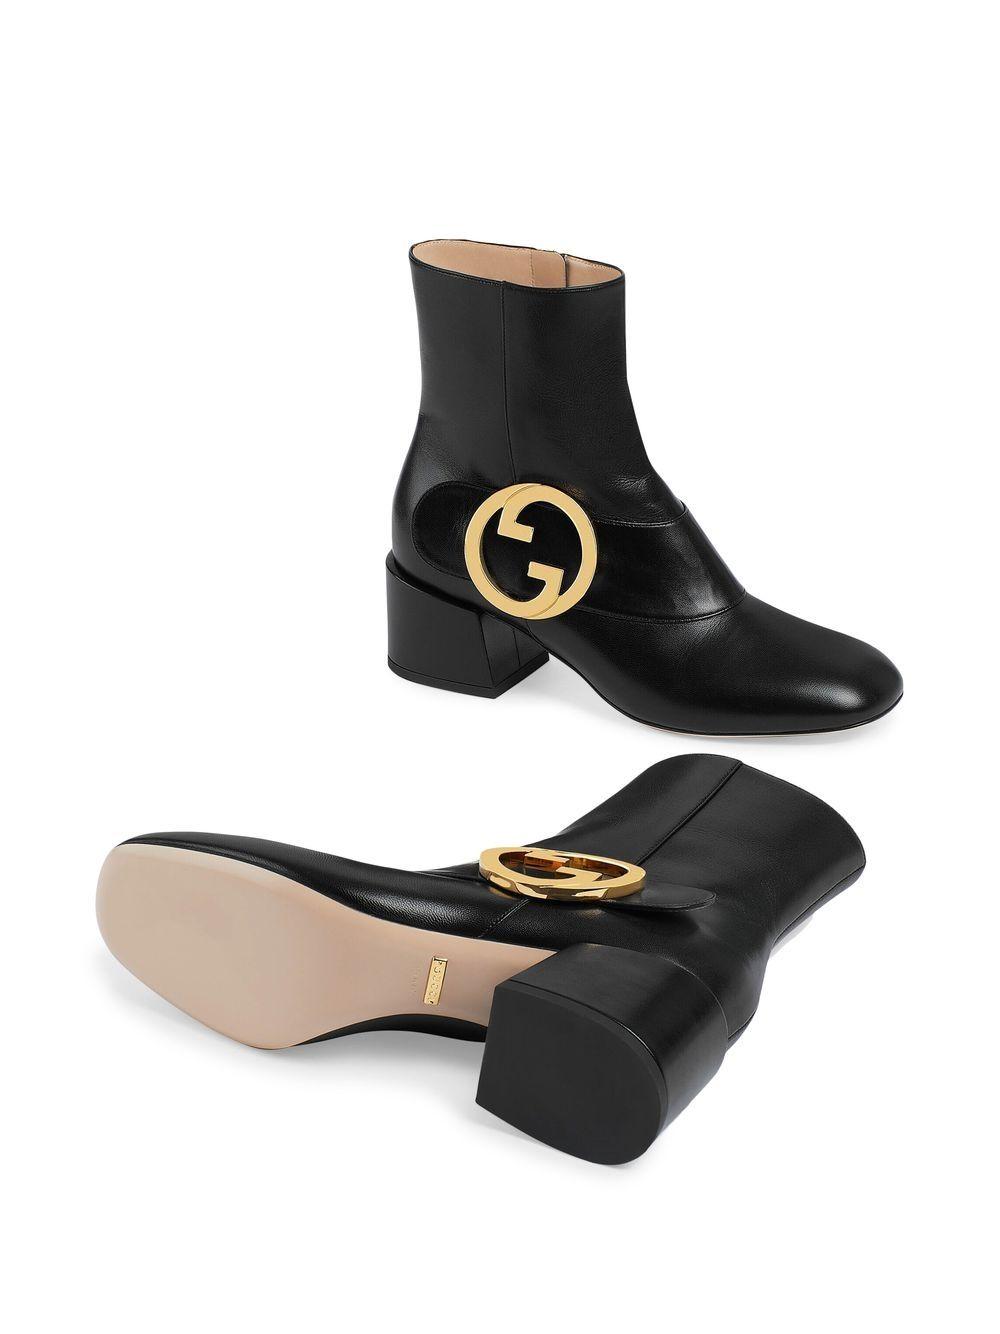 Gucci Blondie Women's Ankle Boot in Black | Lyst